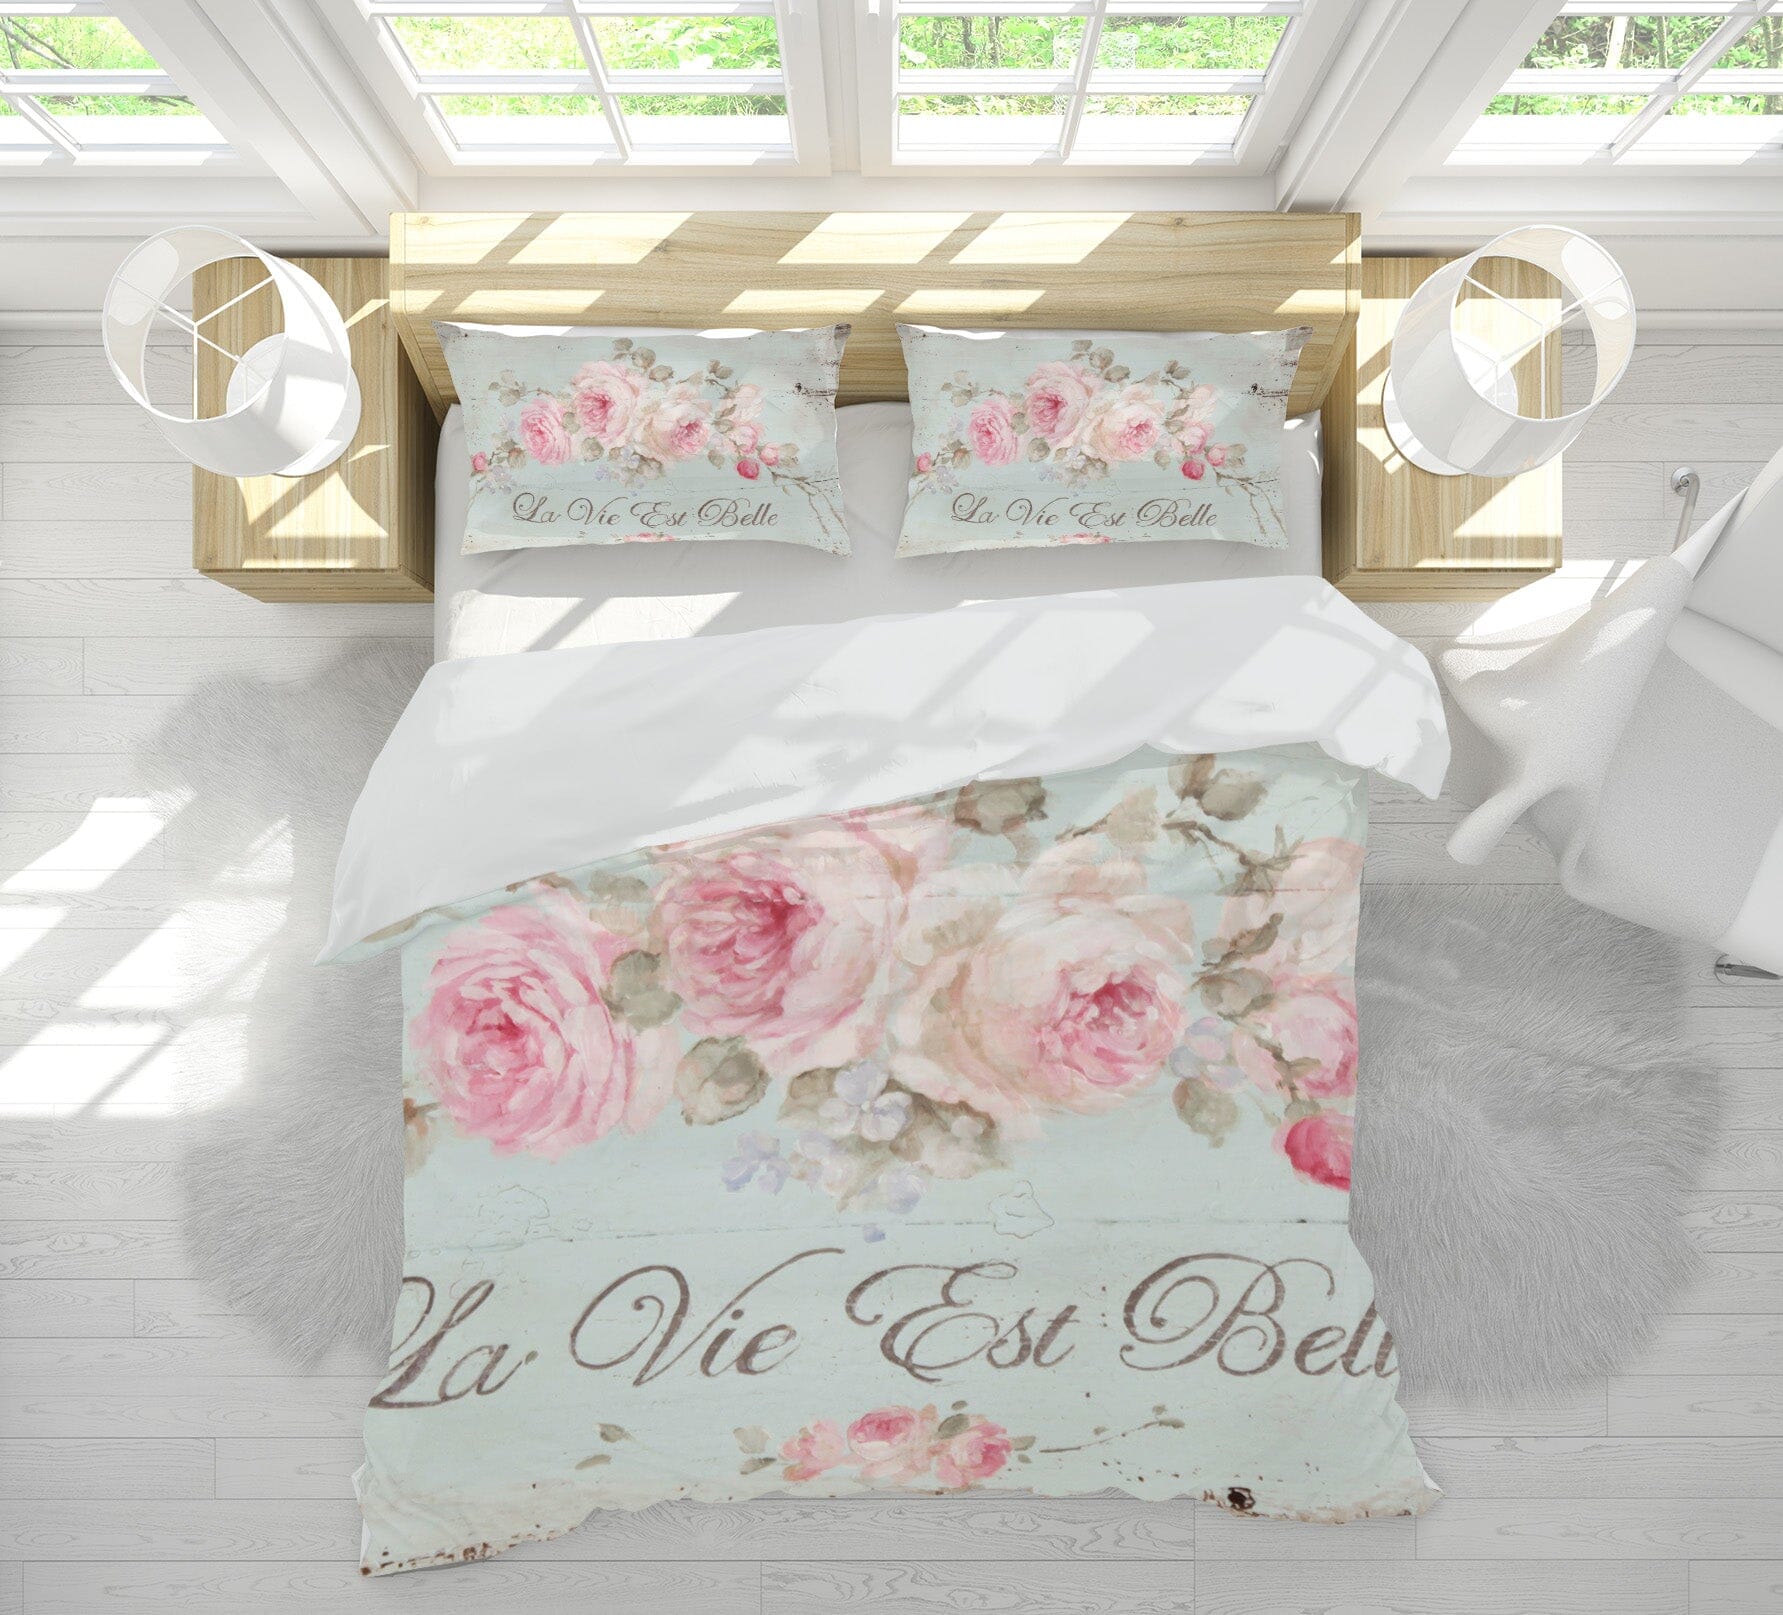 3D Pink Rose 033 Debi Coules Bedding Bed Pillowcases Quilt Quiet Covers AJ Creativity Home 